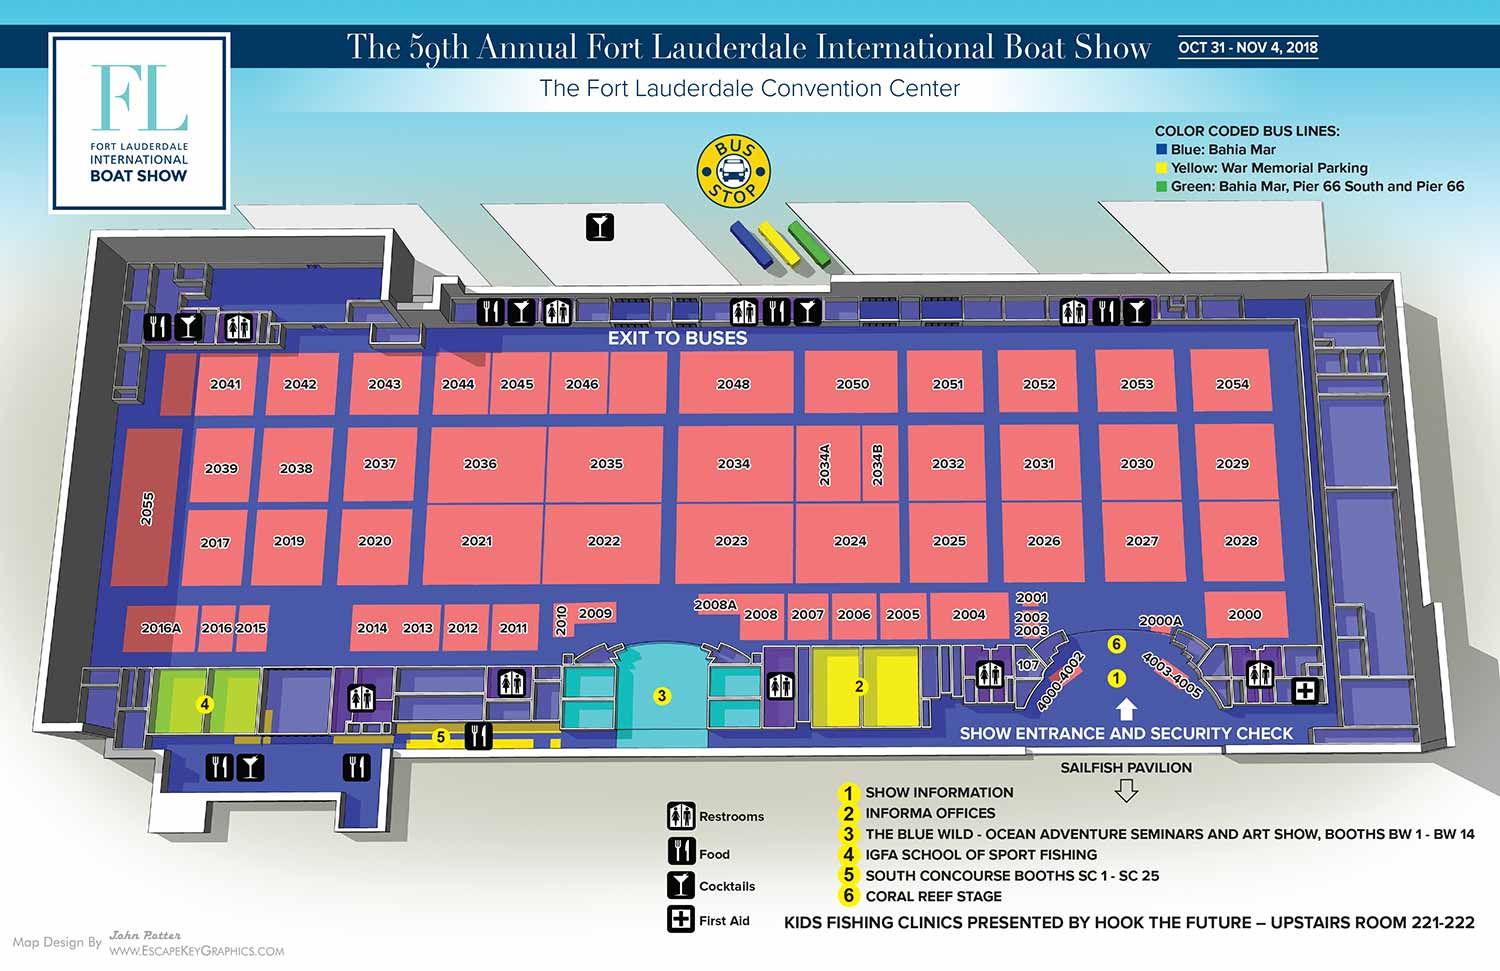 Fort Lauderdale International Boat Show - Broward County Convention Center Map